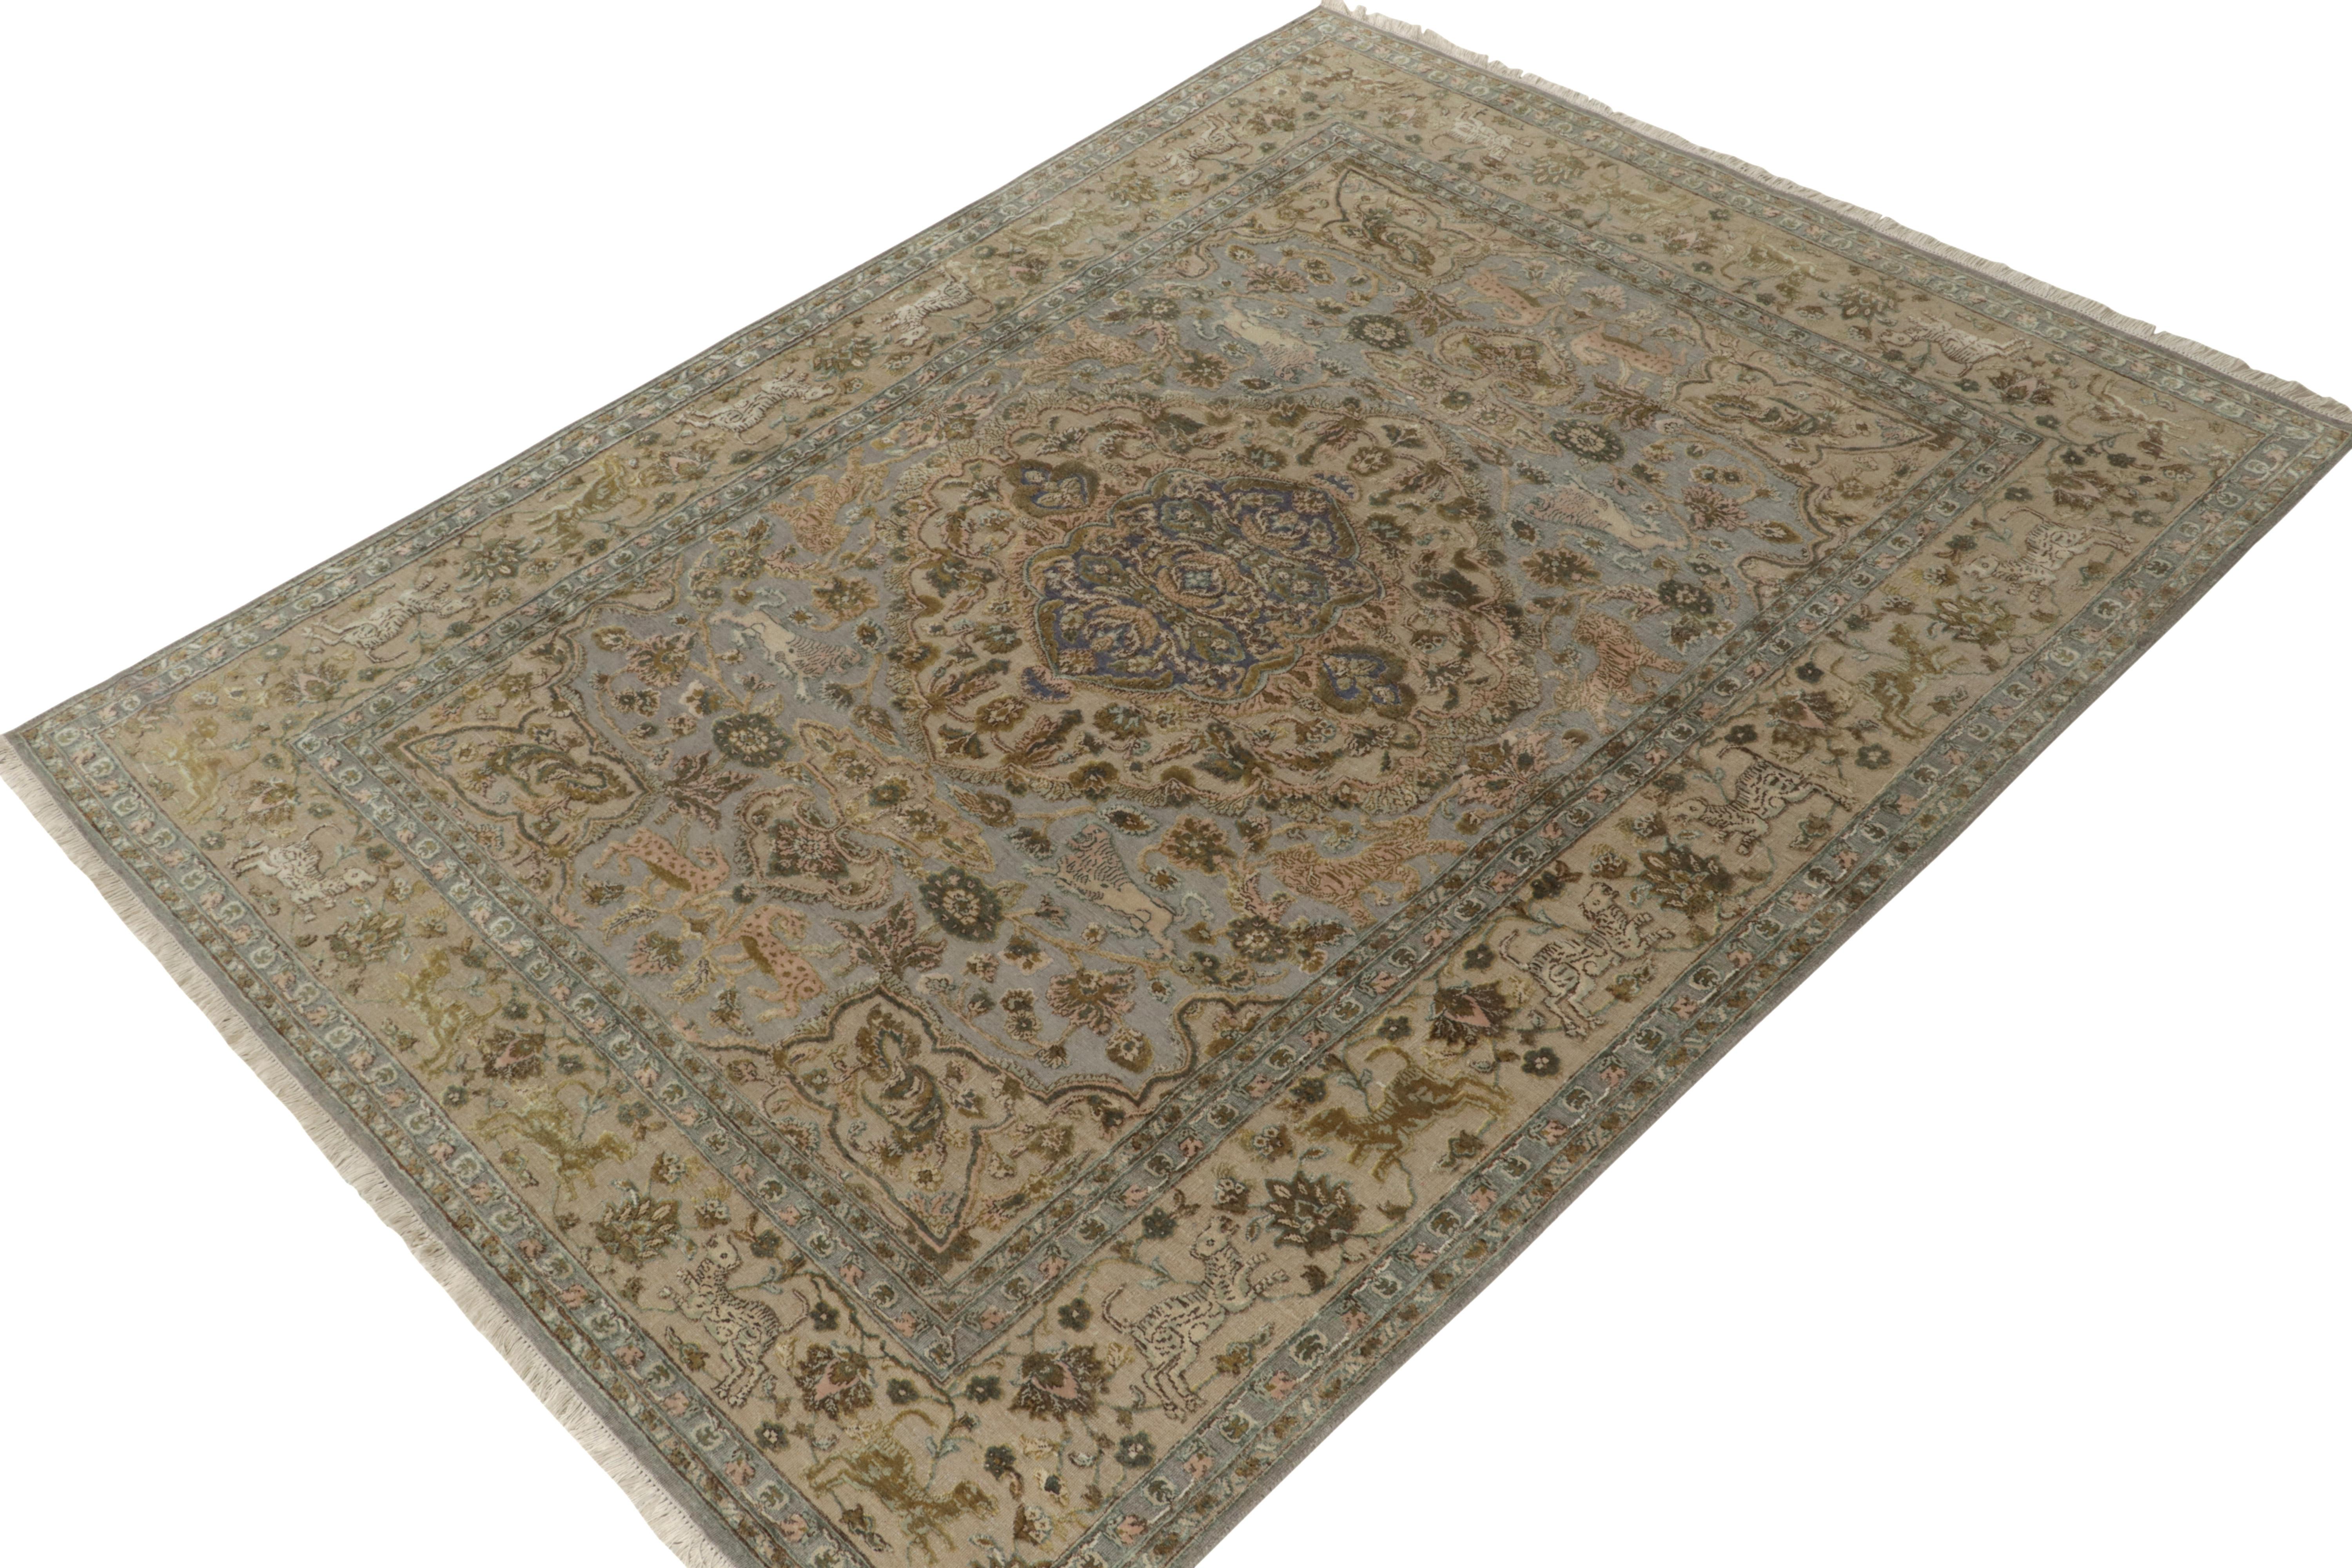 Hand-knotted in fine wool & silk, this 8x10 from our Modern Classics collection draws inspiration from the most regal antique Tabriz rug styles. 

On the Design: The gracious scale carries pictorial styles depicting animal representations, which